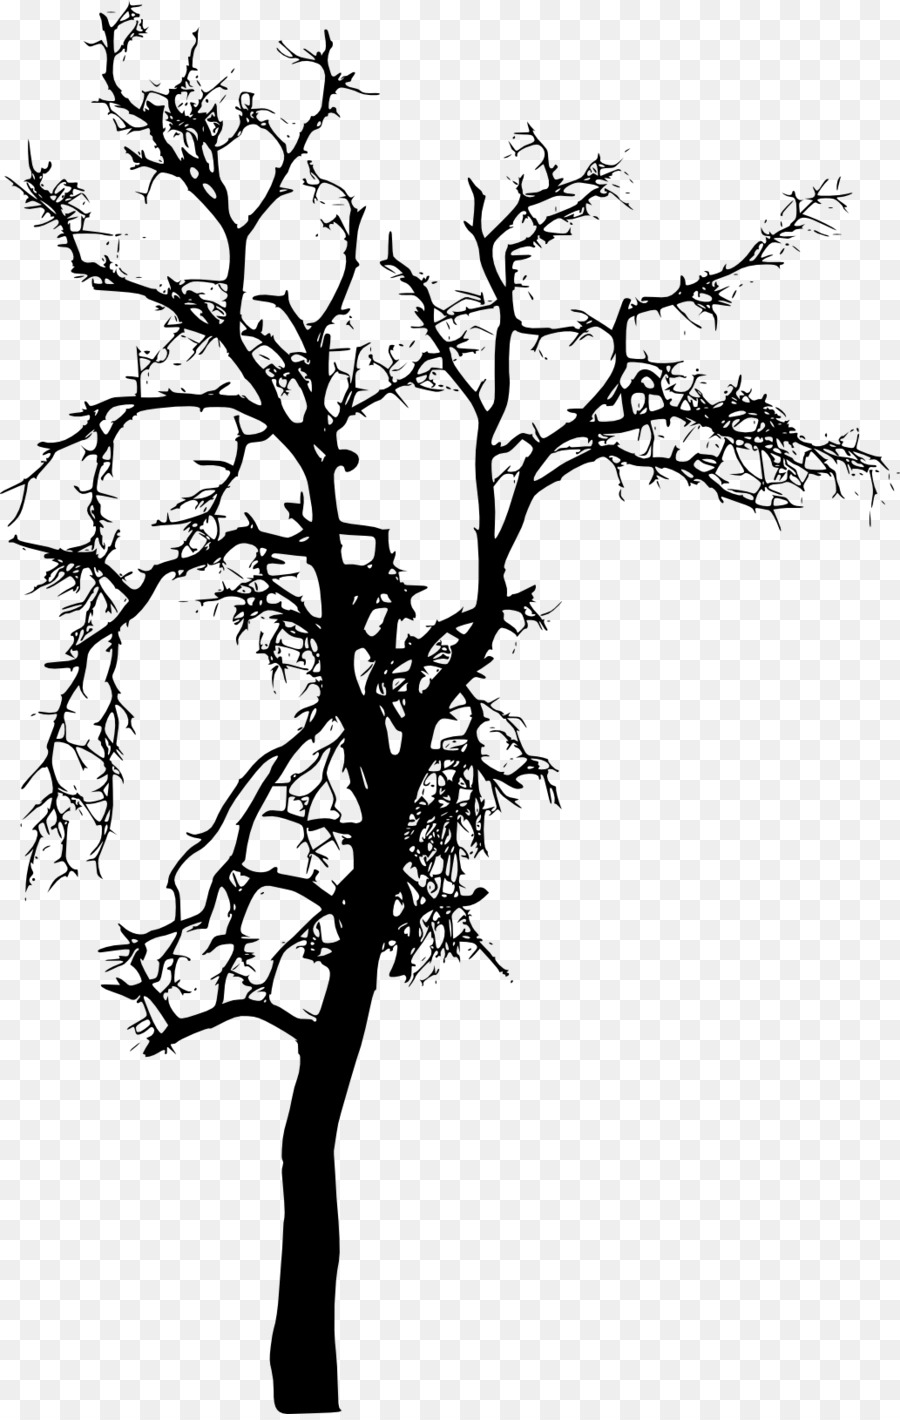 Tree Silhouette Clip art - tree vector png download - 1788*2000 - Free ...